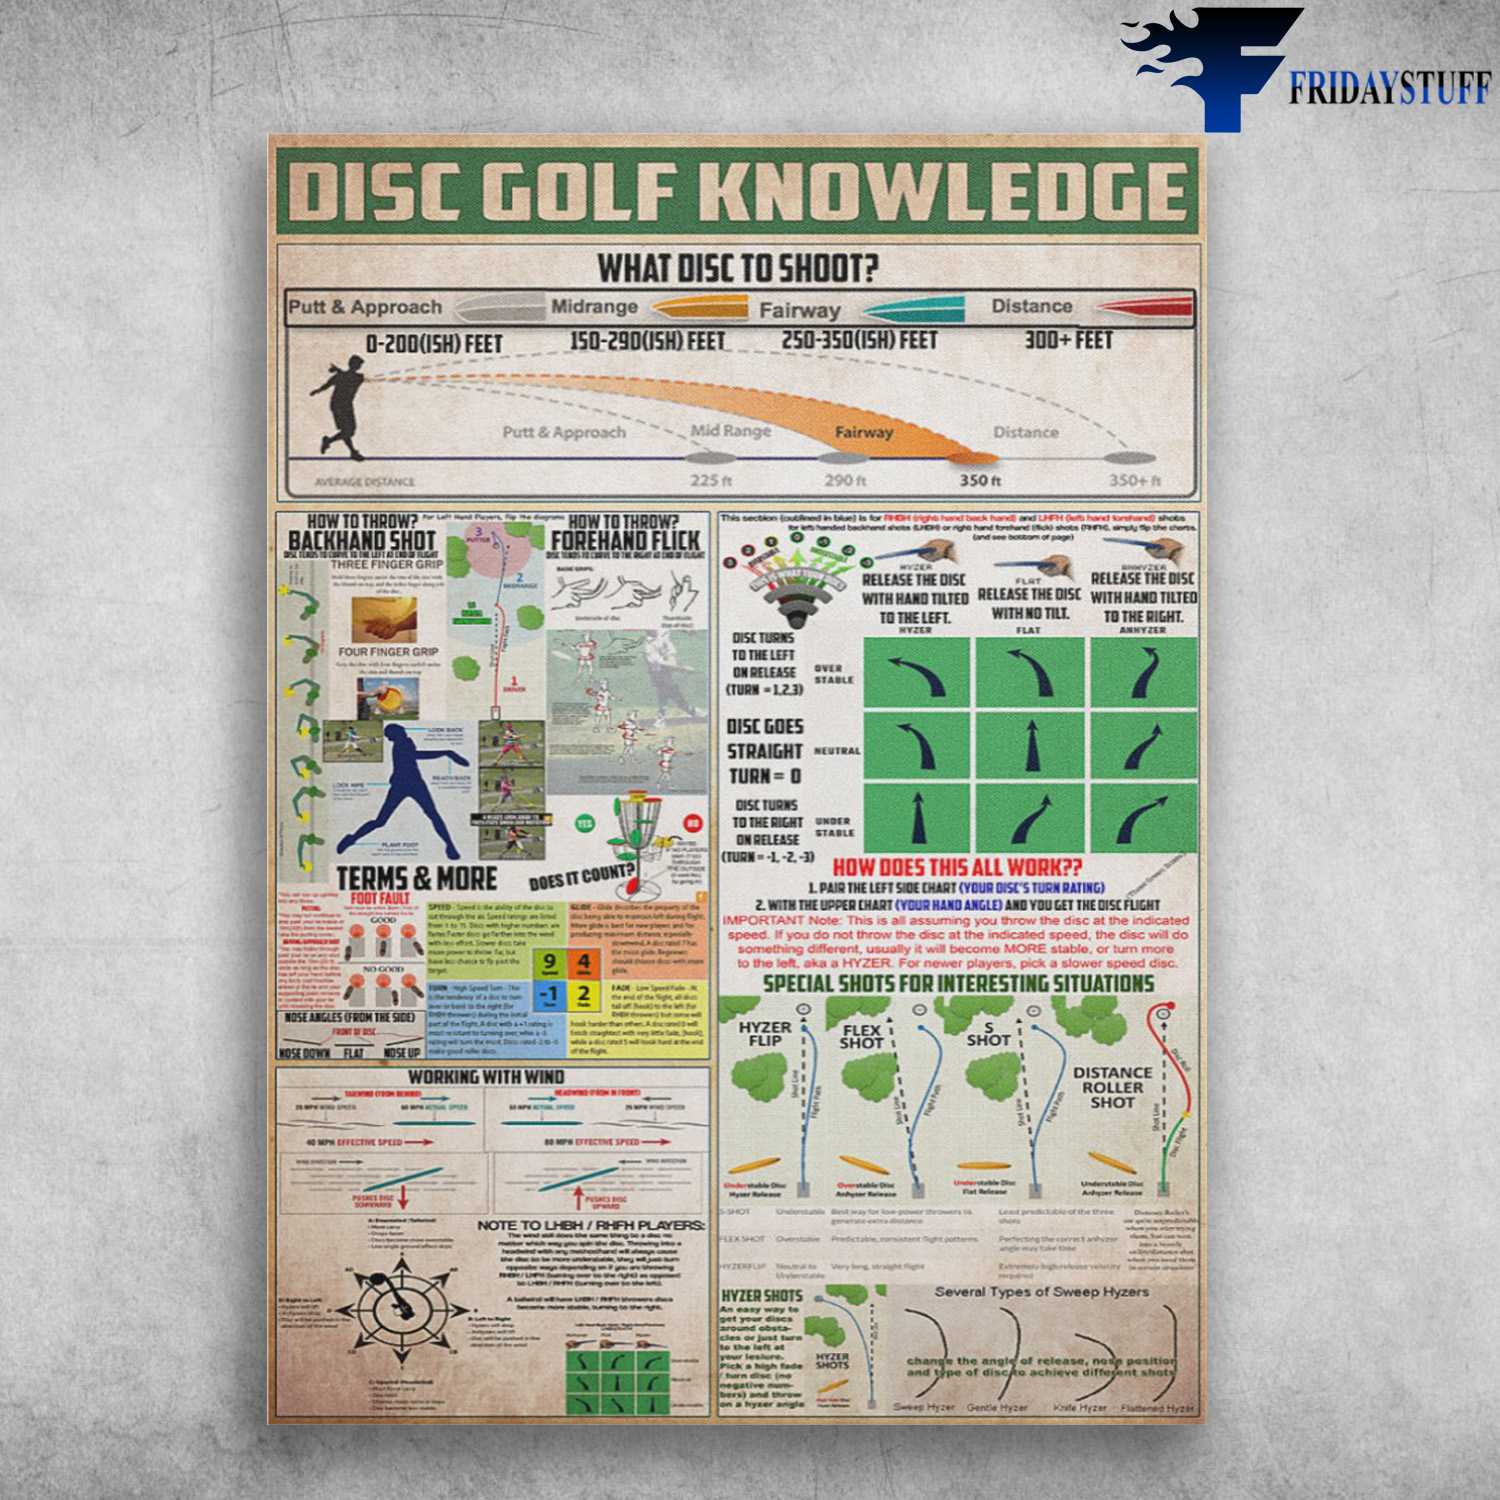 Disc Gold Knowledge, What Disc To Shoot, How To Throw Backhard Shot, How To Throw Forehand Flick, Tearms And More, Working With Wind, How Does This All Work